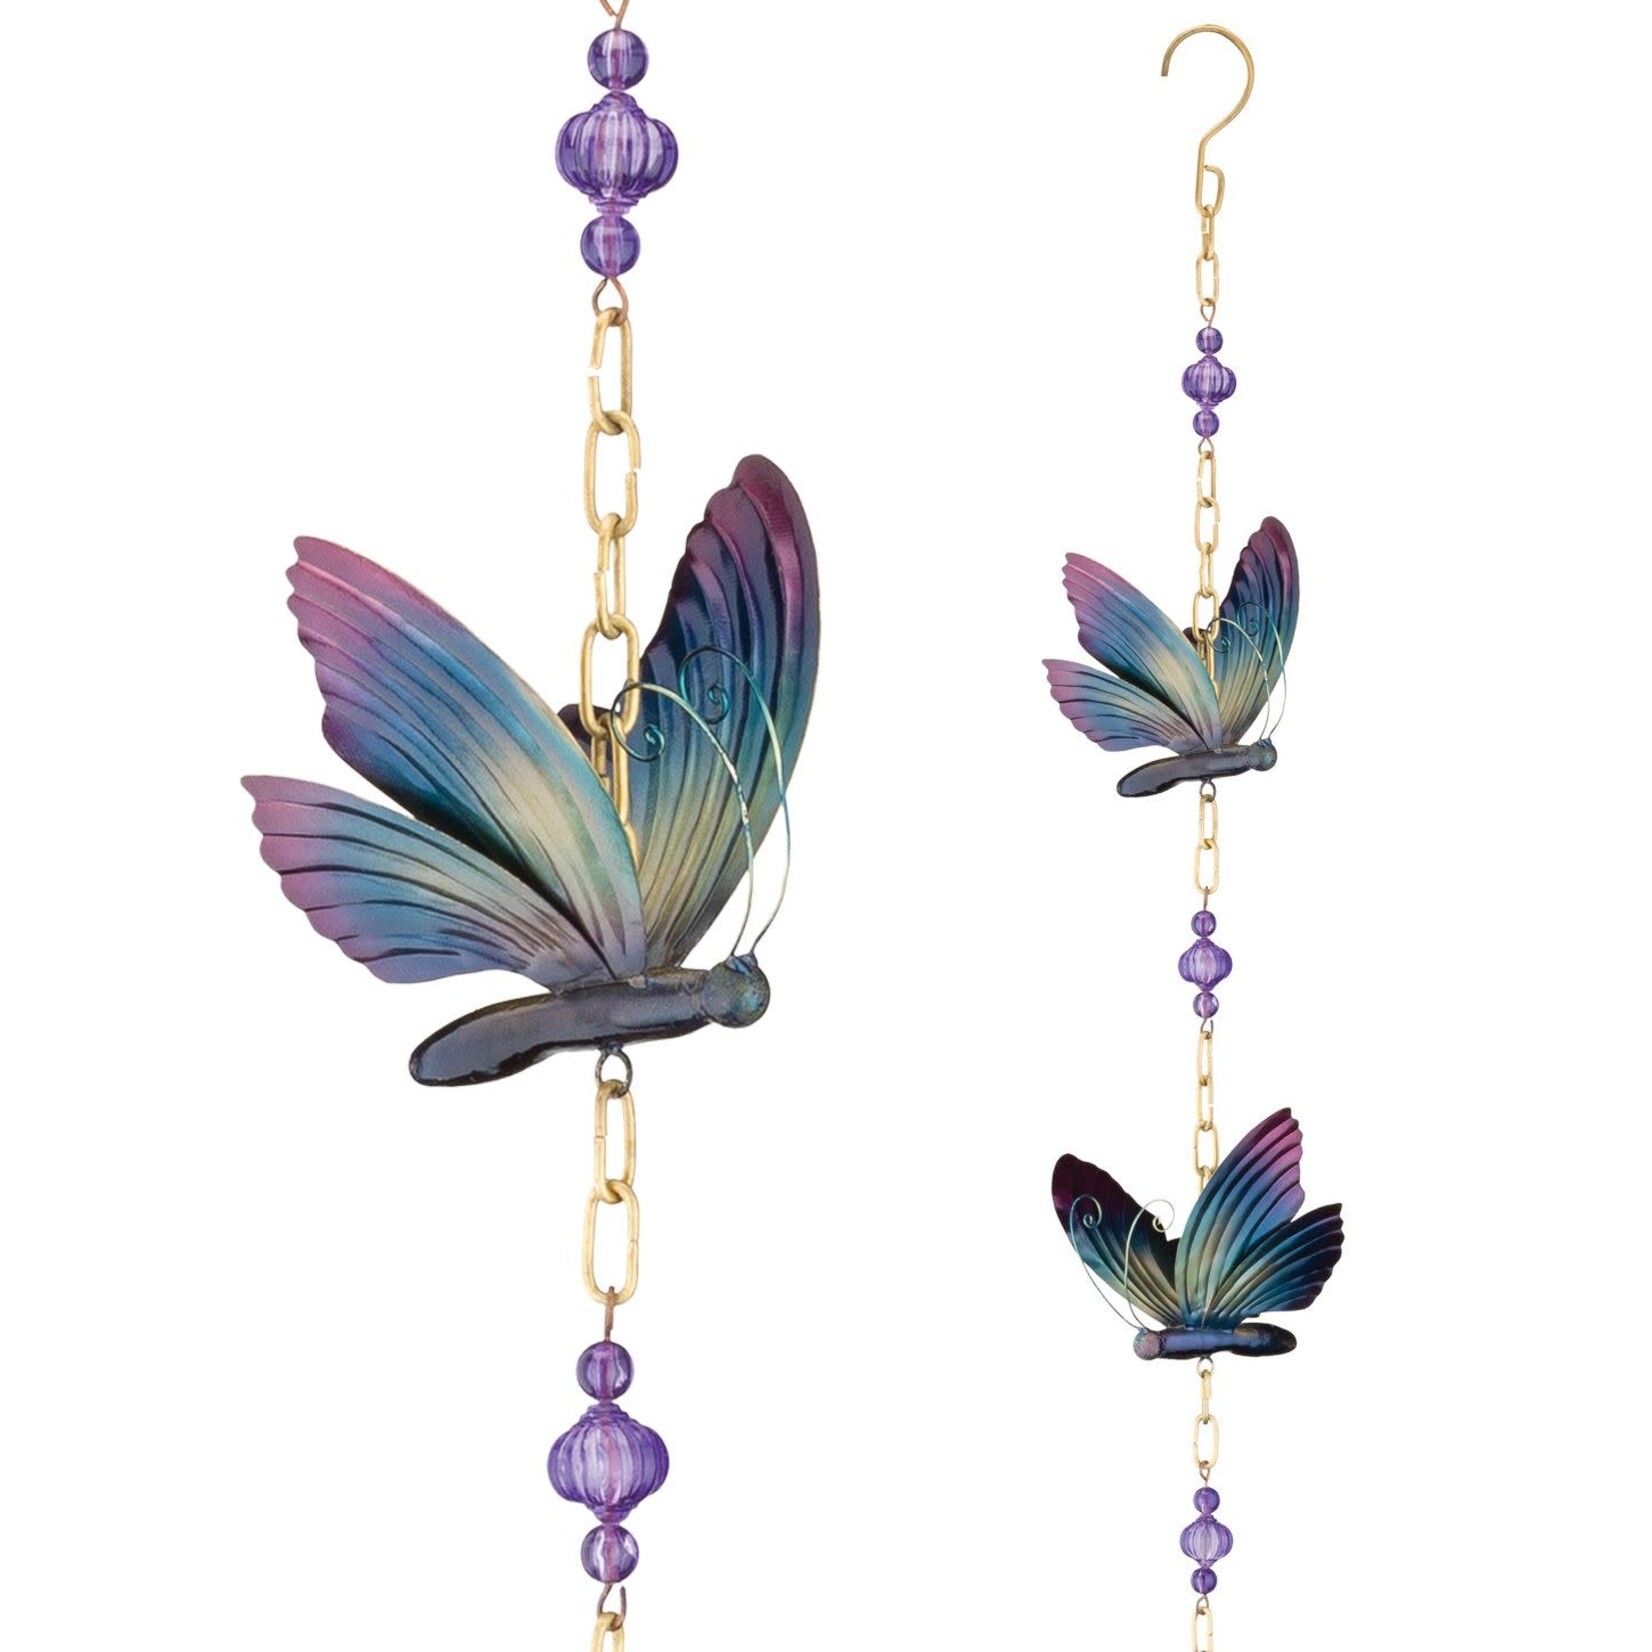 Regal Art & Gift Hanging Ornament Butterfly